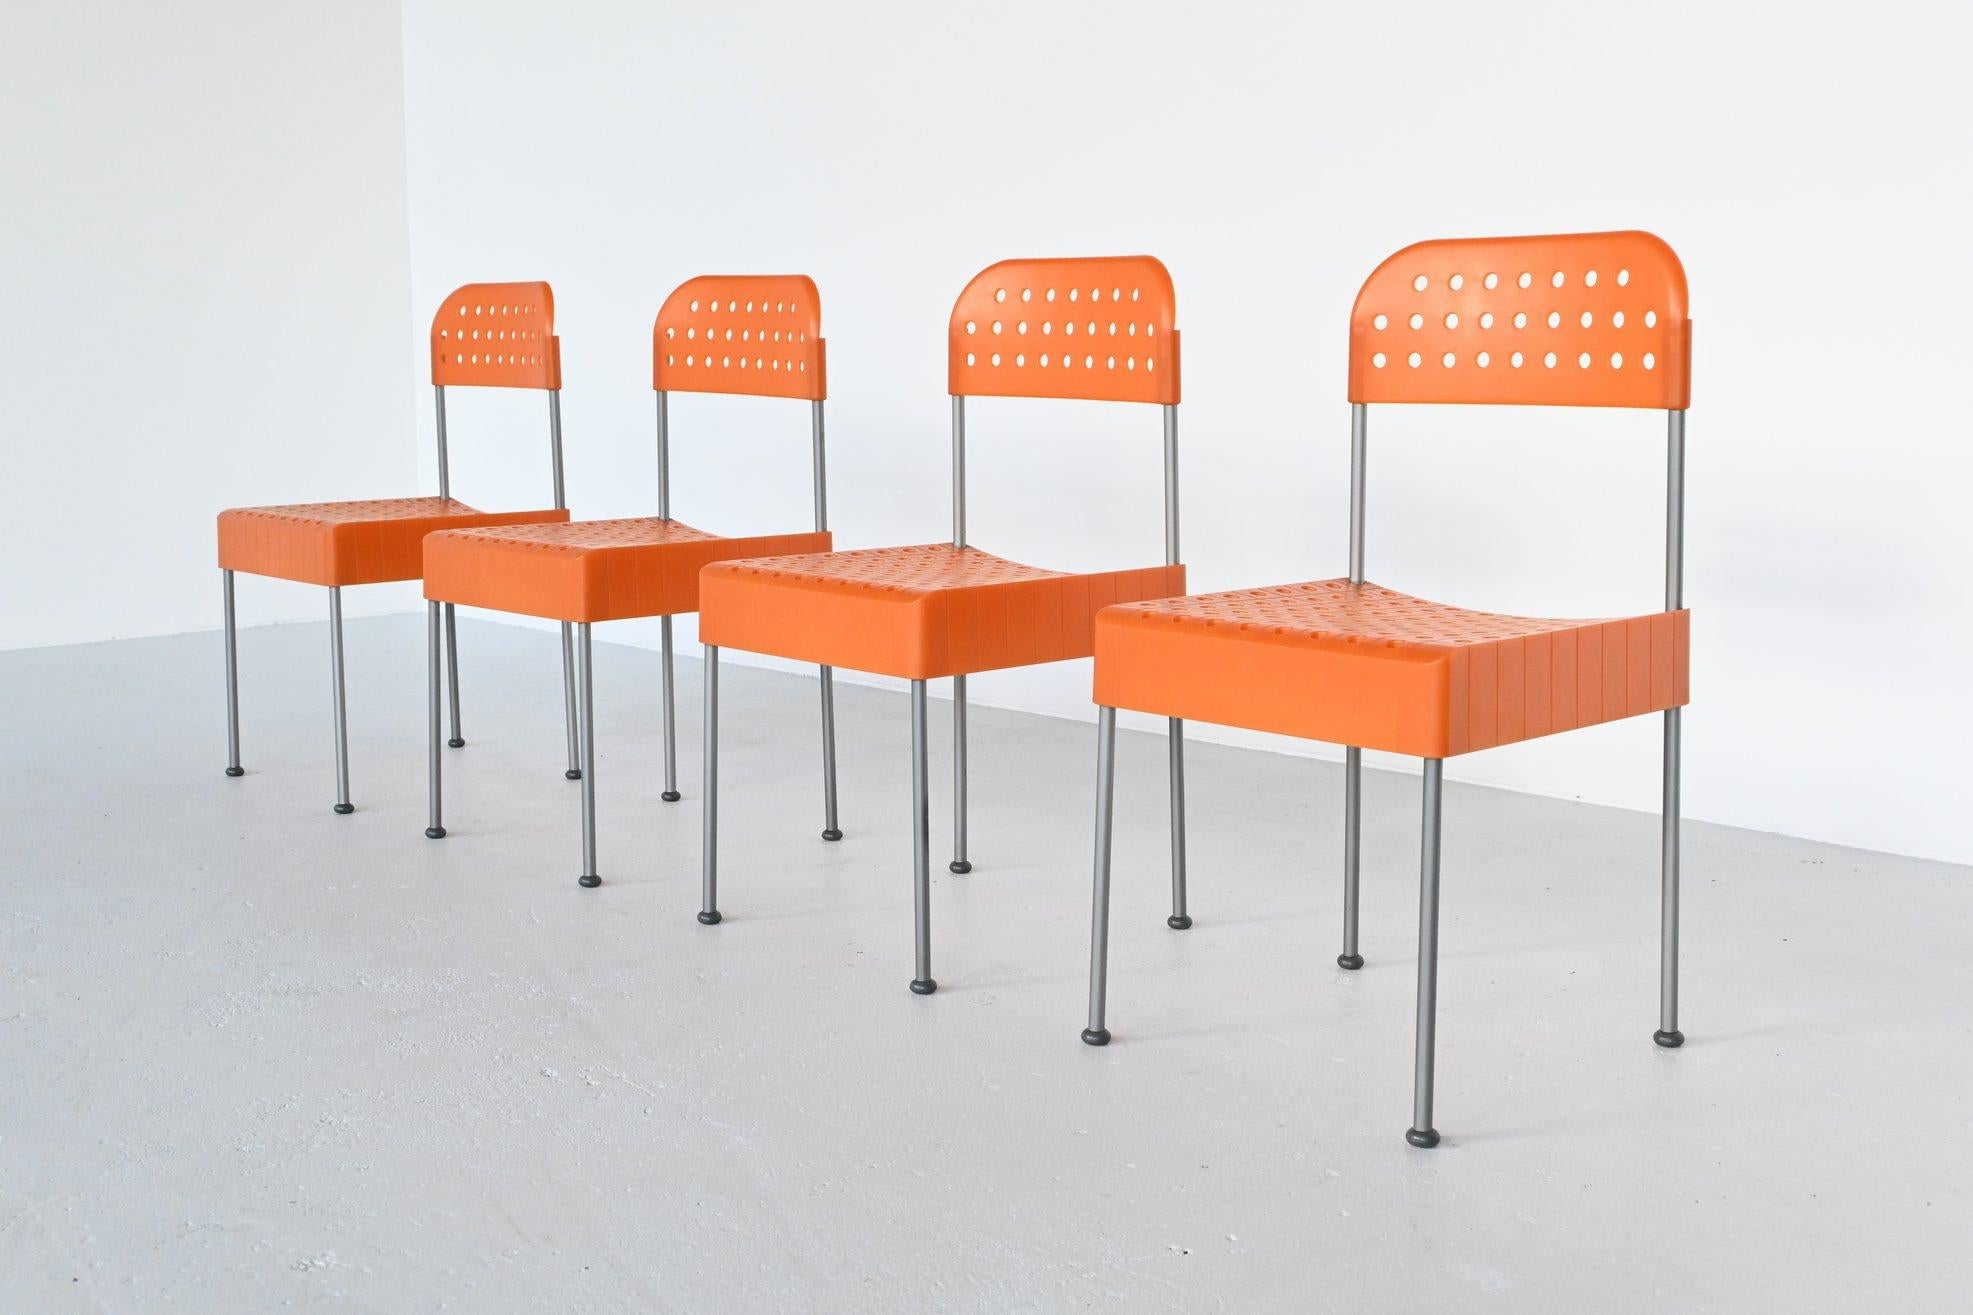 Very nice set of 4 orange box chairs designed by Enzo Mari and manufactured by Aleph Atlantide (Driade), Italy 1970. This chair is a good example of a rational design, the components can be easily dismantled and packed into a flat box as big as the